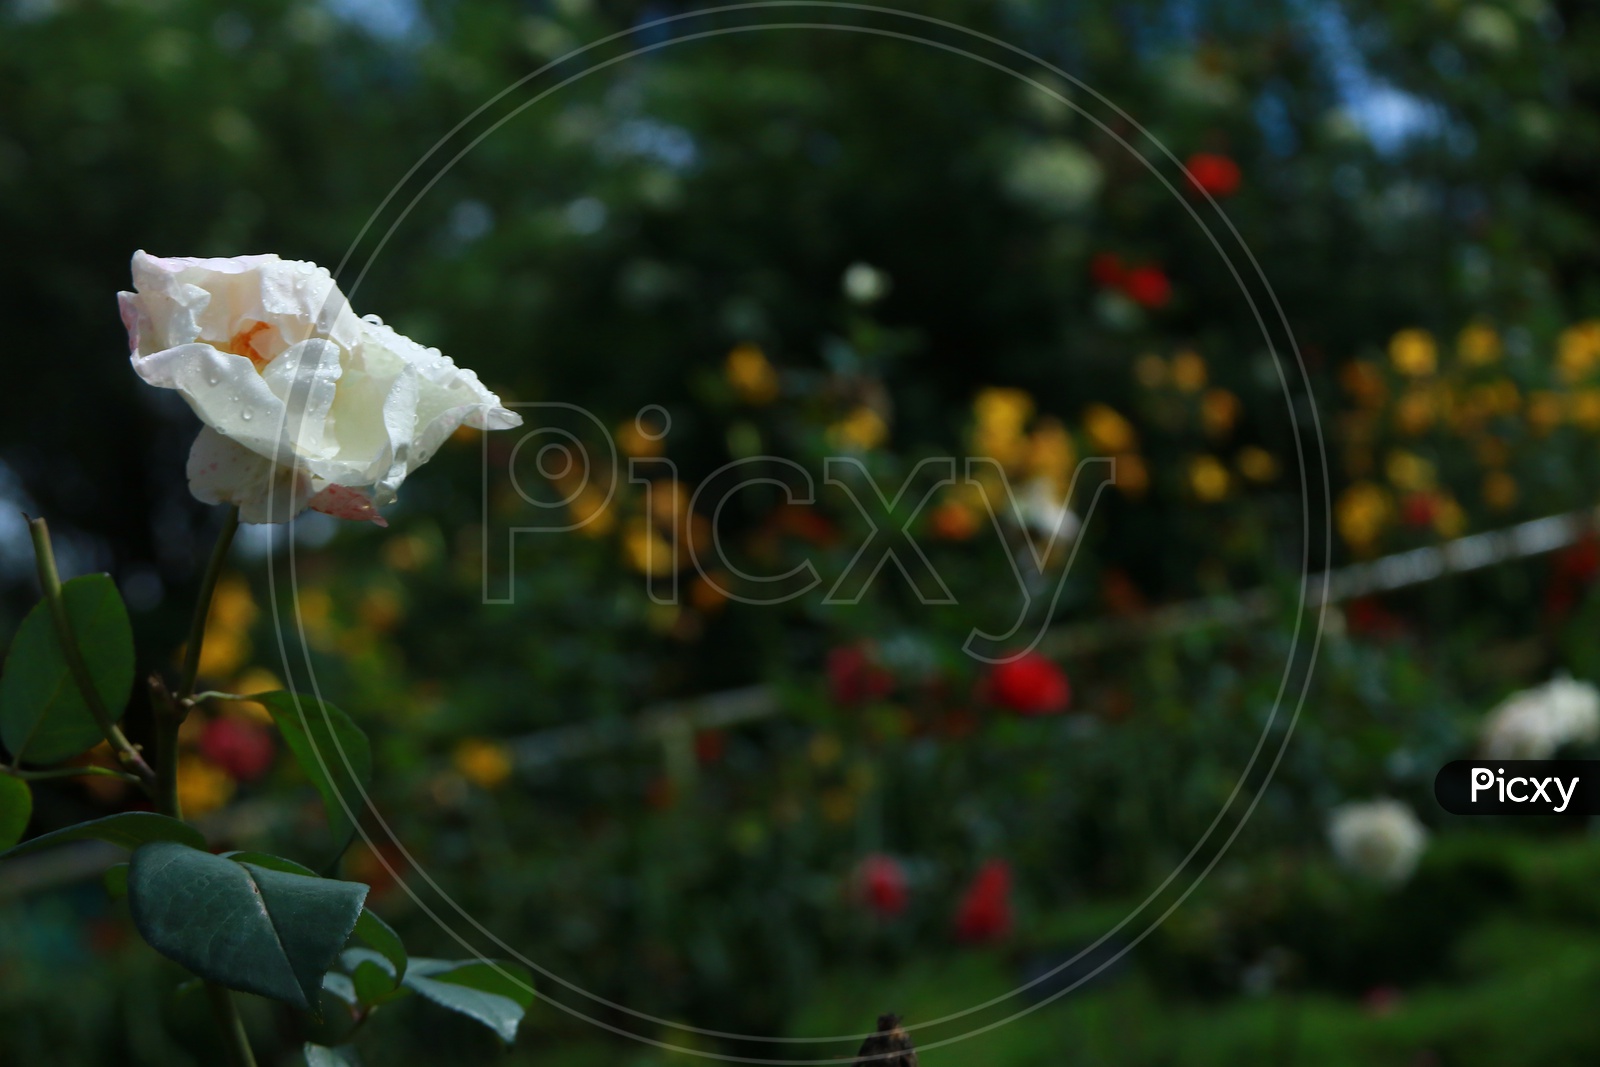 A Fully grown White Rose with water droplets